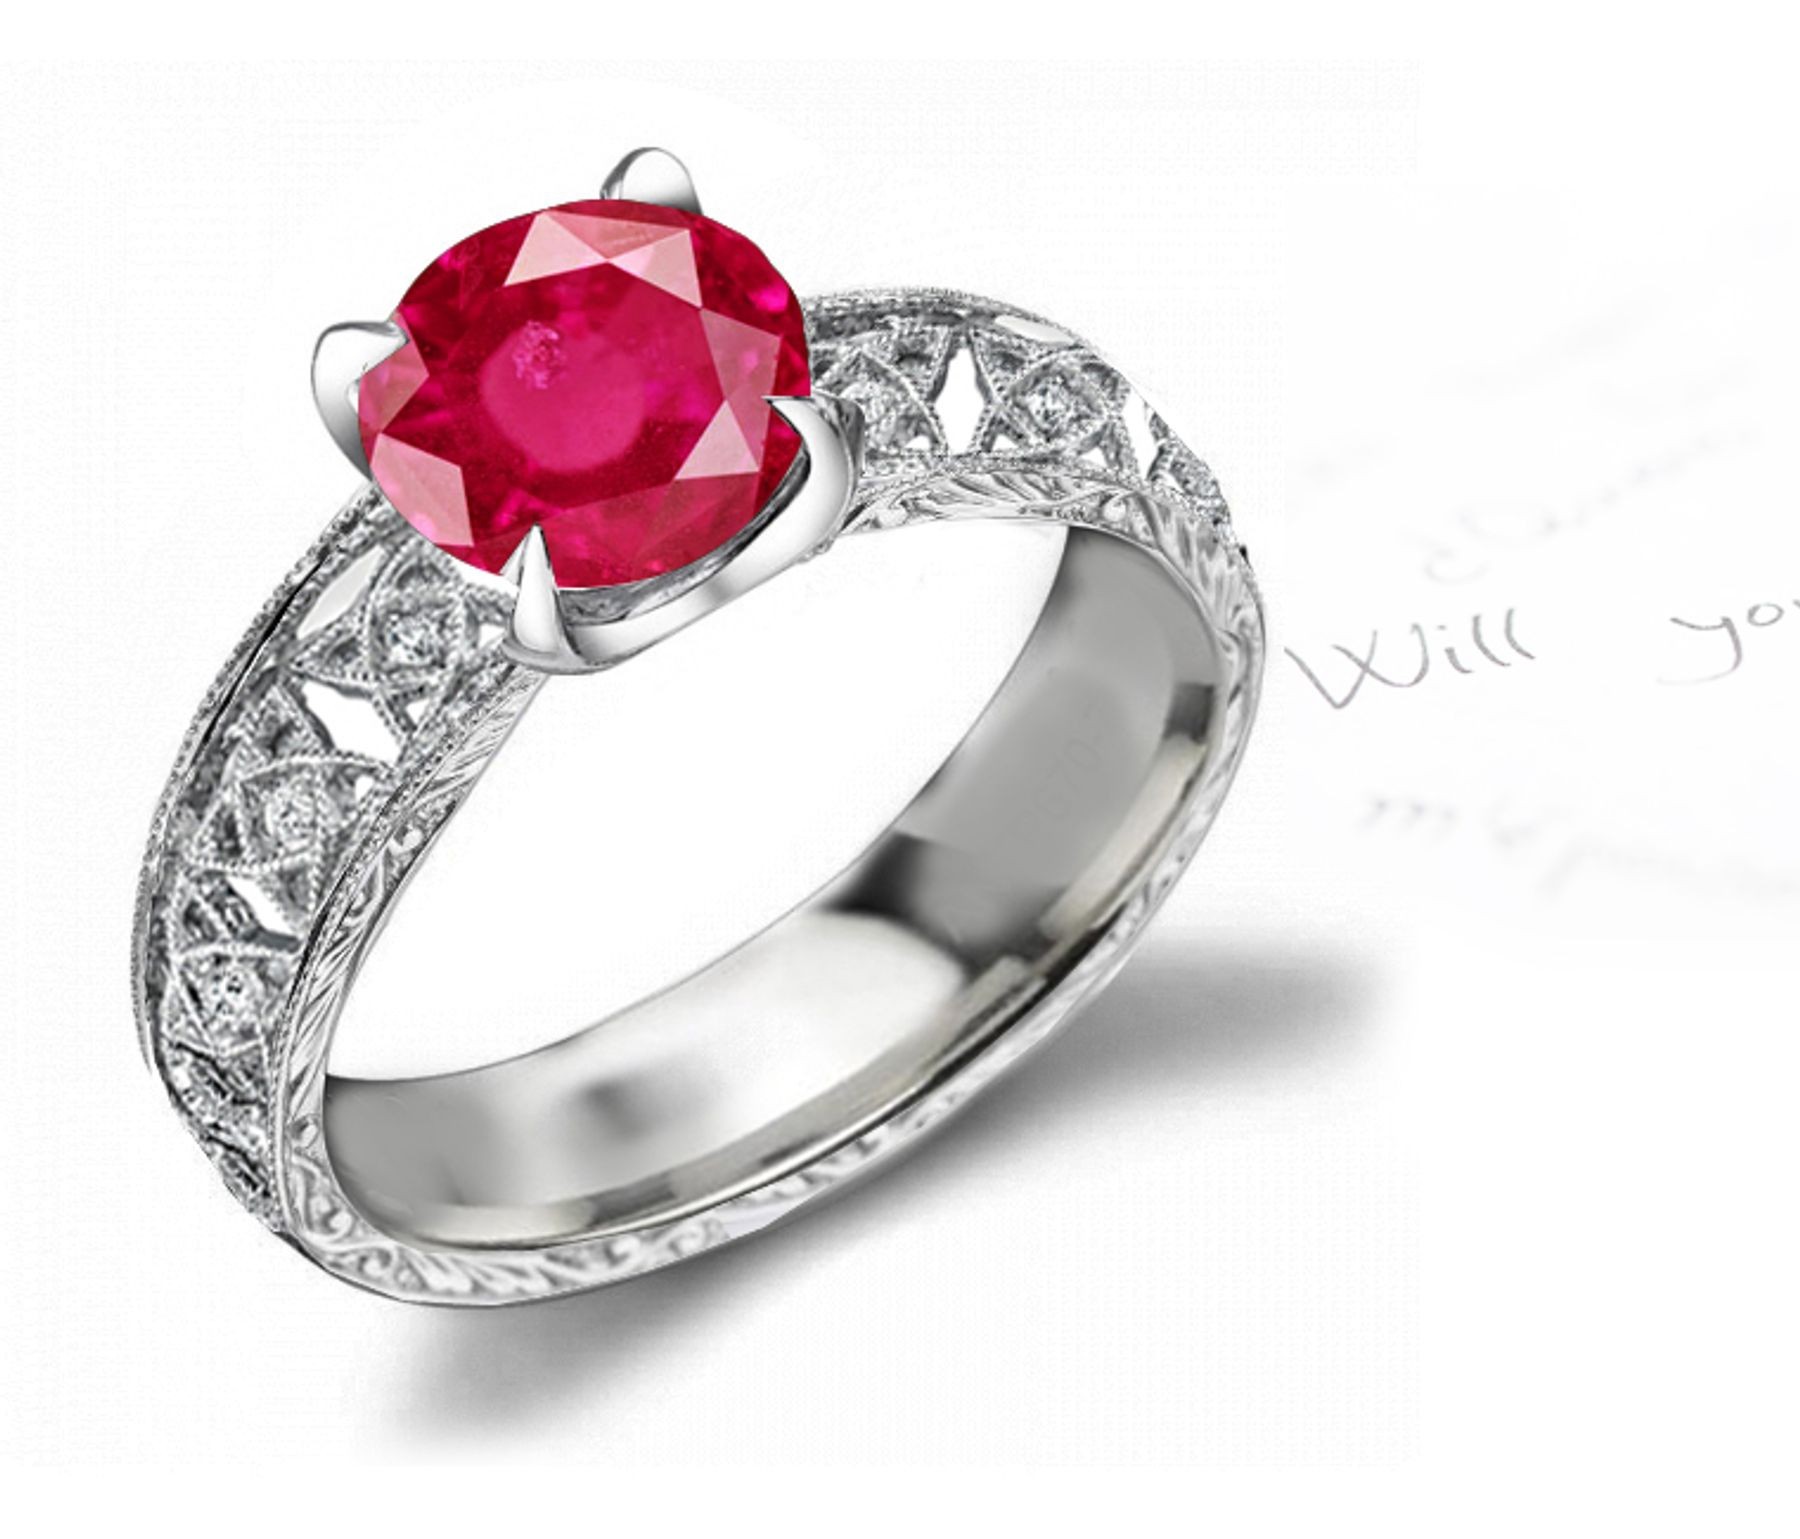 Absolutely Authentic: Antique Style Ruby or Sapphire and Diamond Ring with Finely-Scrolled Openwork Detail in 14k White Gold Ring Size 3 to 8